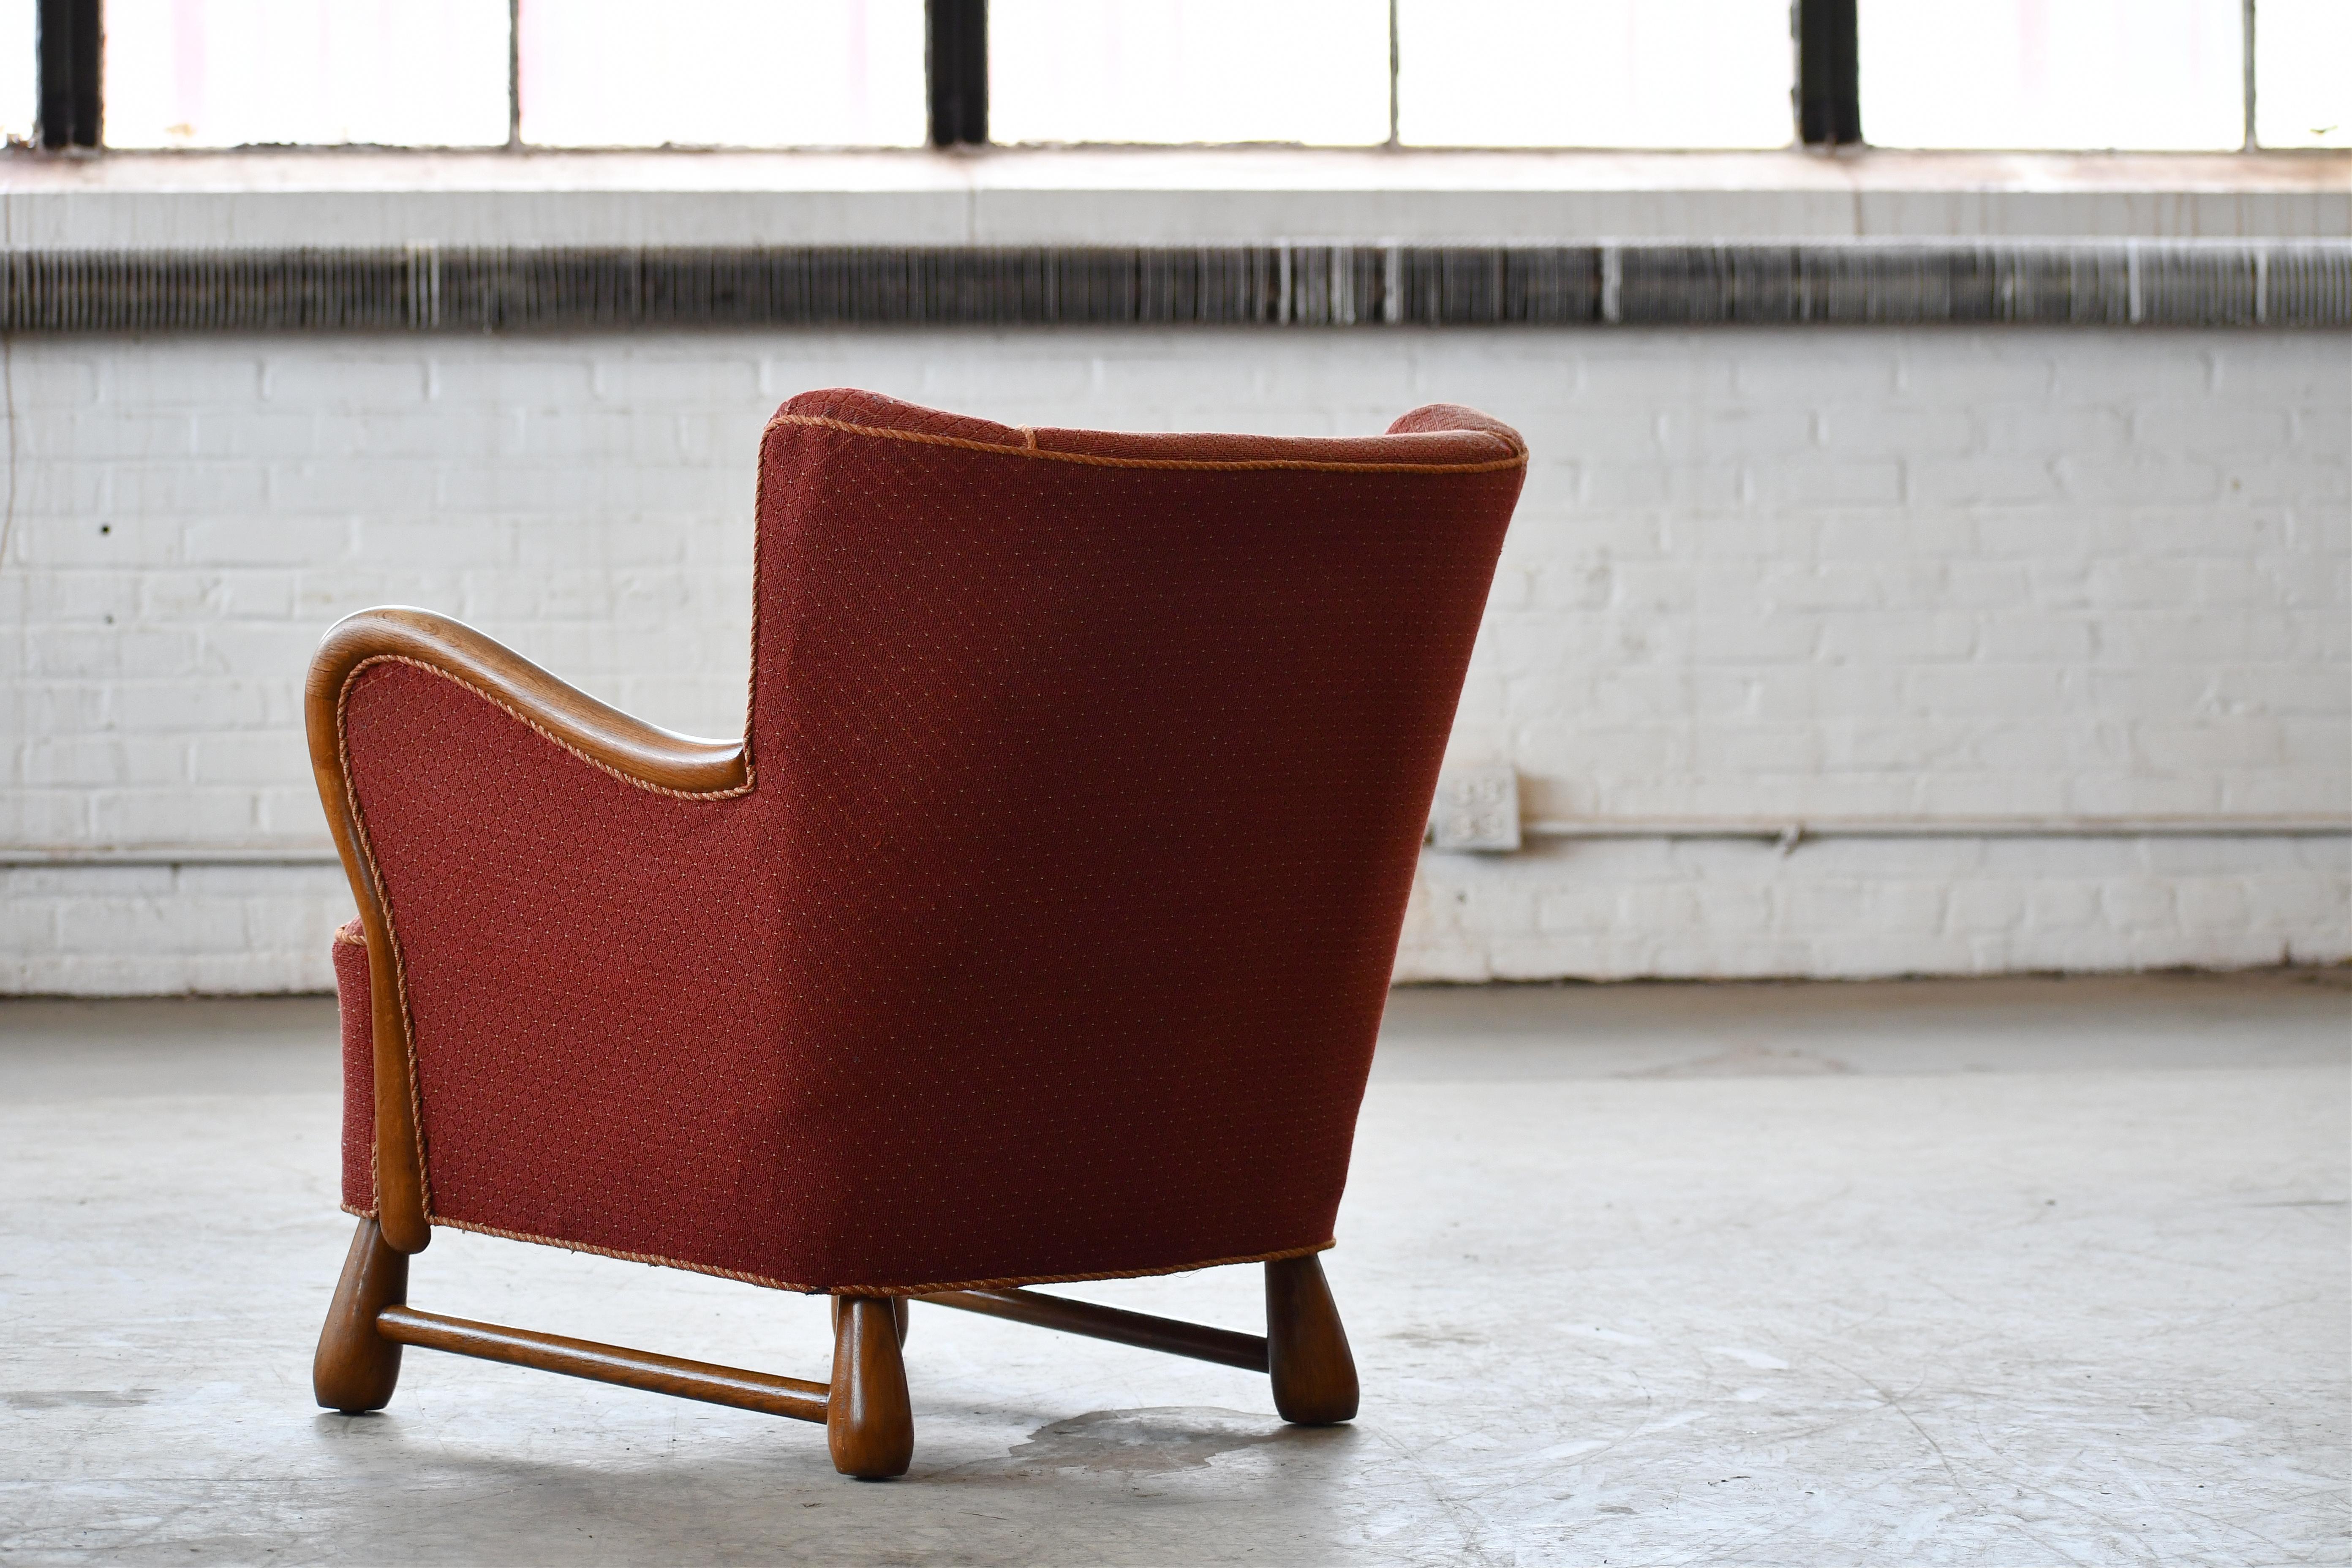 Rare Danish Easy Lounge Chair in Mahogany Attributed to Otto Færge, 1940's For Sale 3